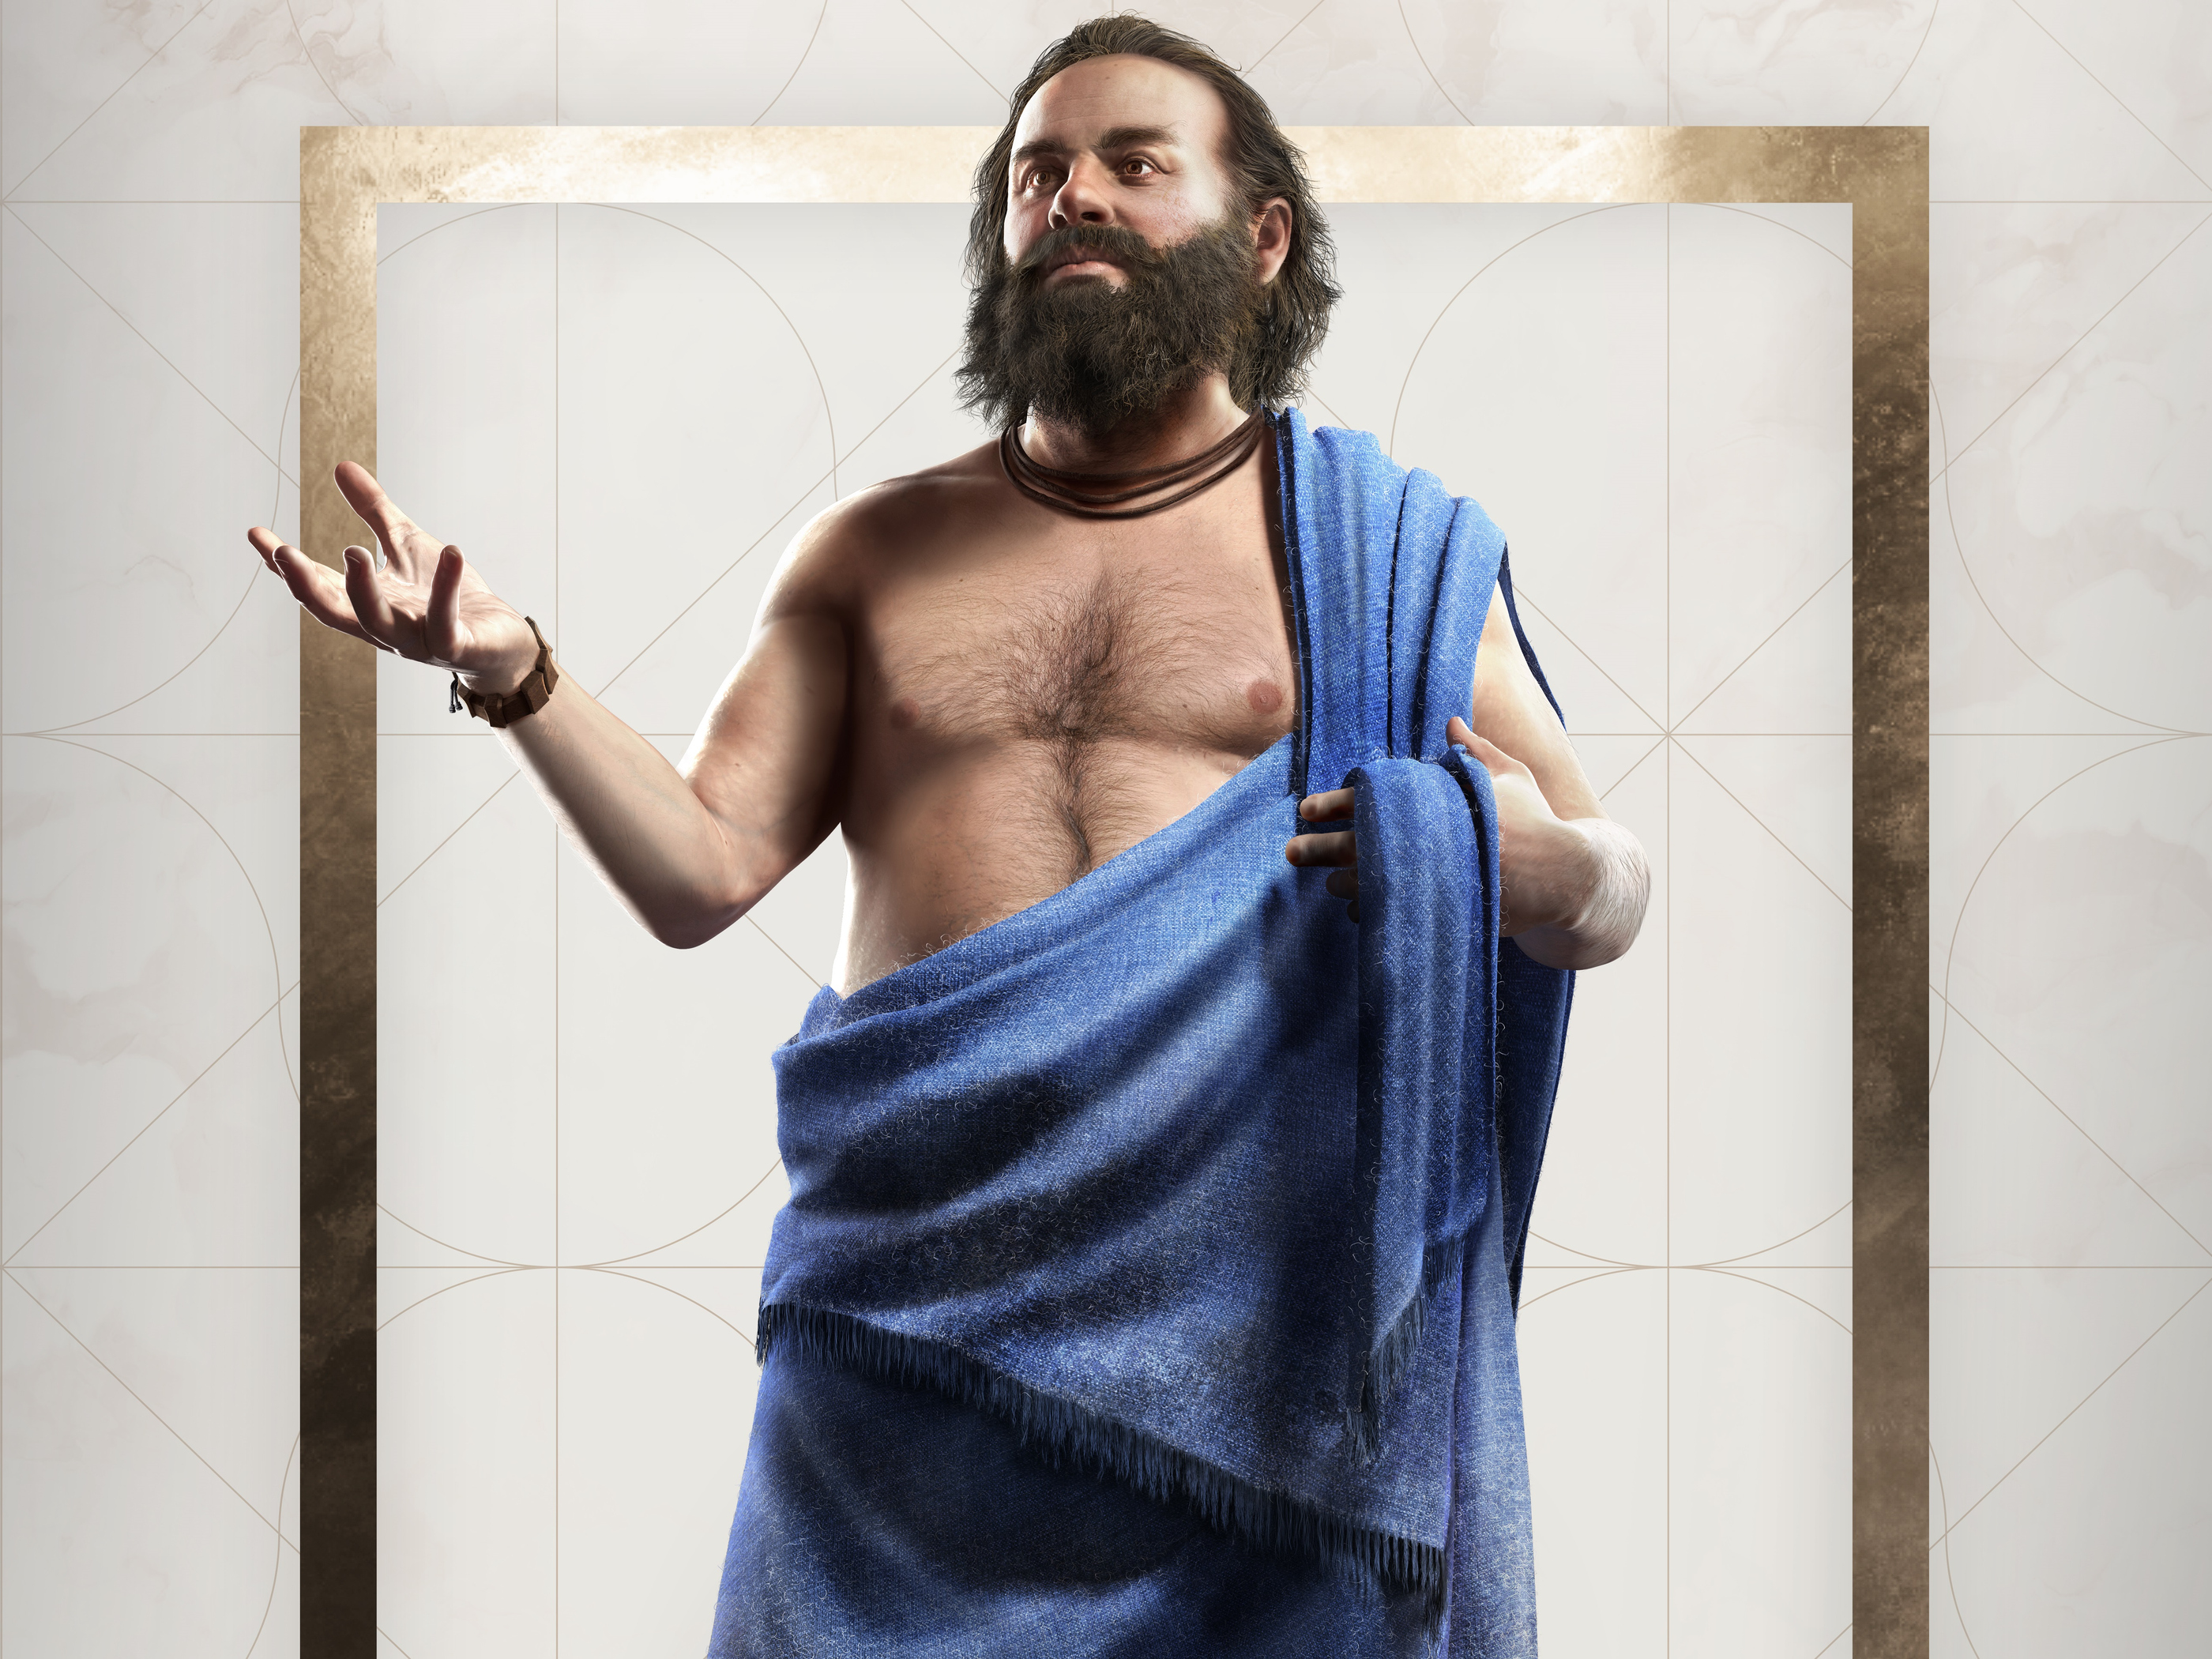 My Free Wallpapers  Artistic Wallpaper  David  The Death of Socrates